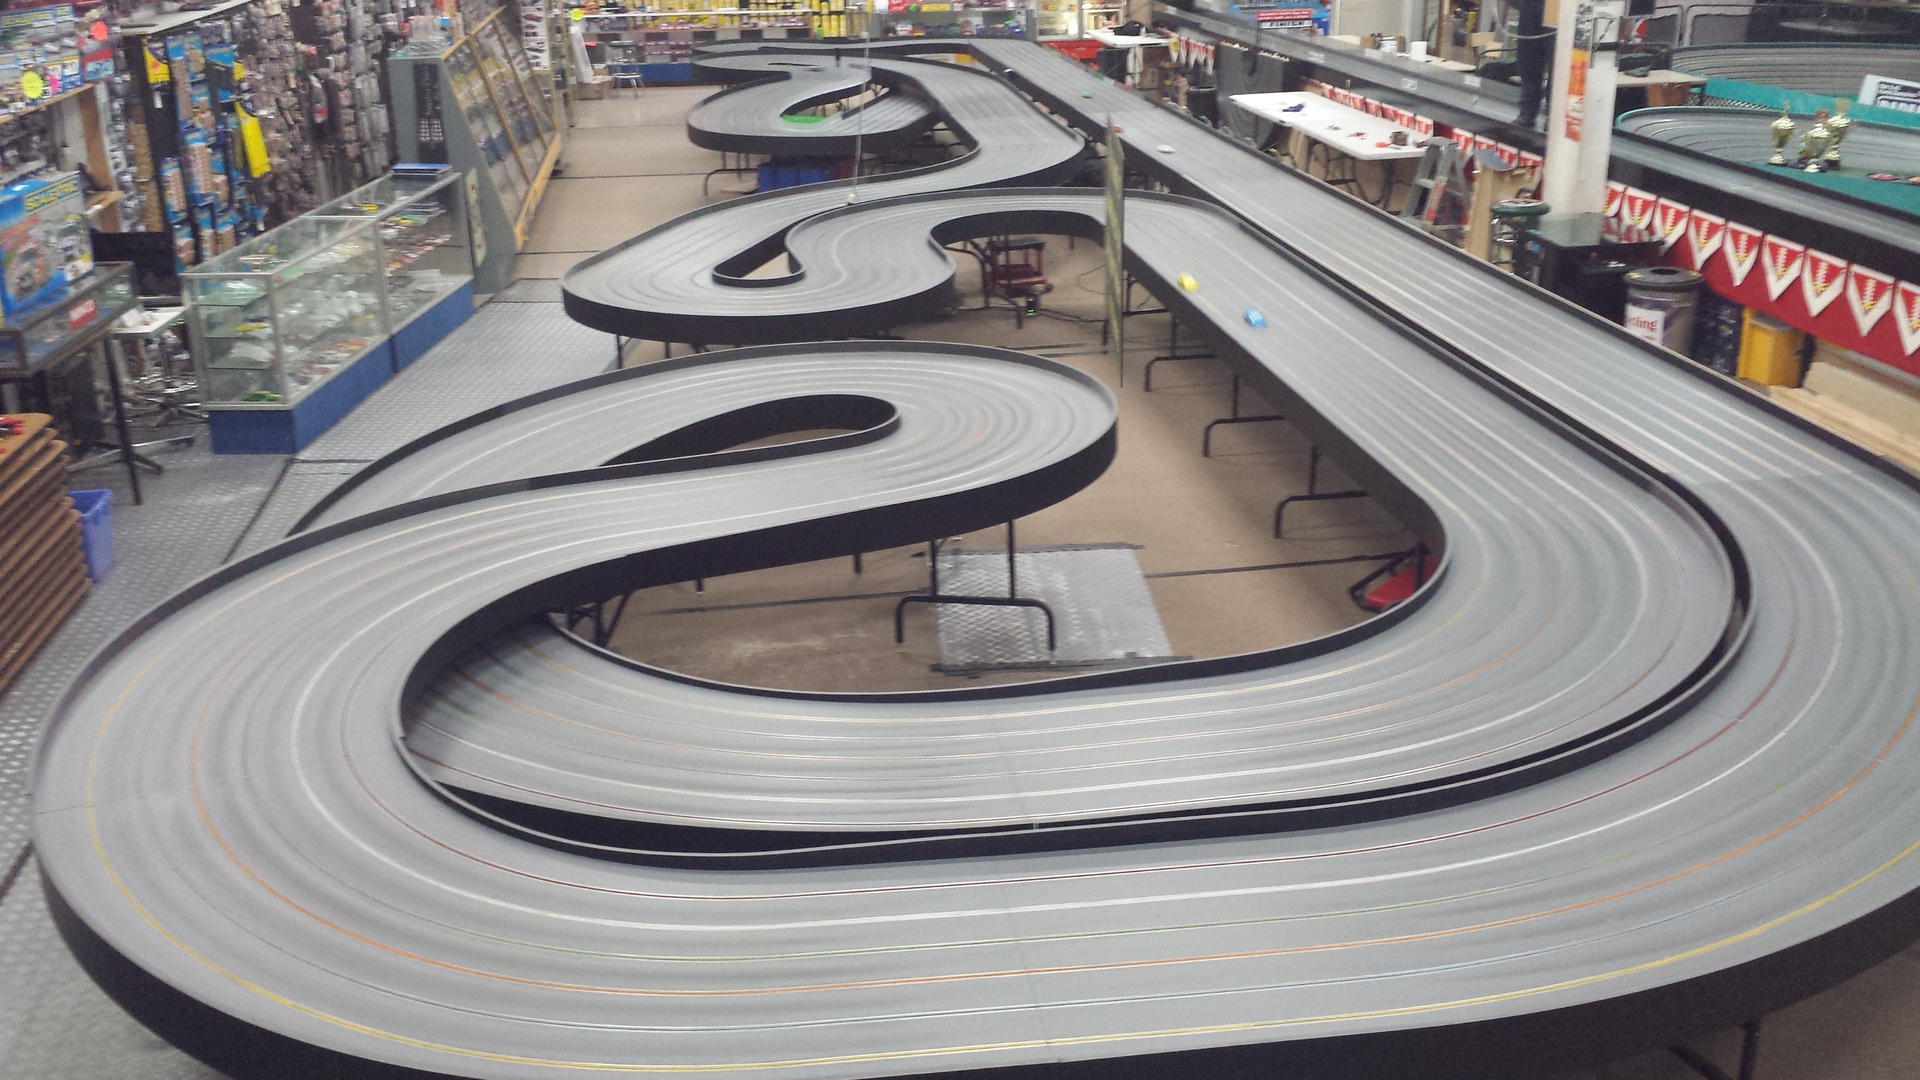 Commercial Slot Car Racing Tracks For Sale - Car Sale and Rentals